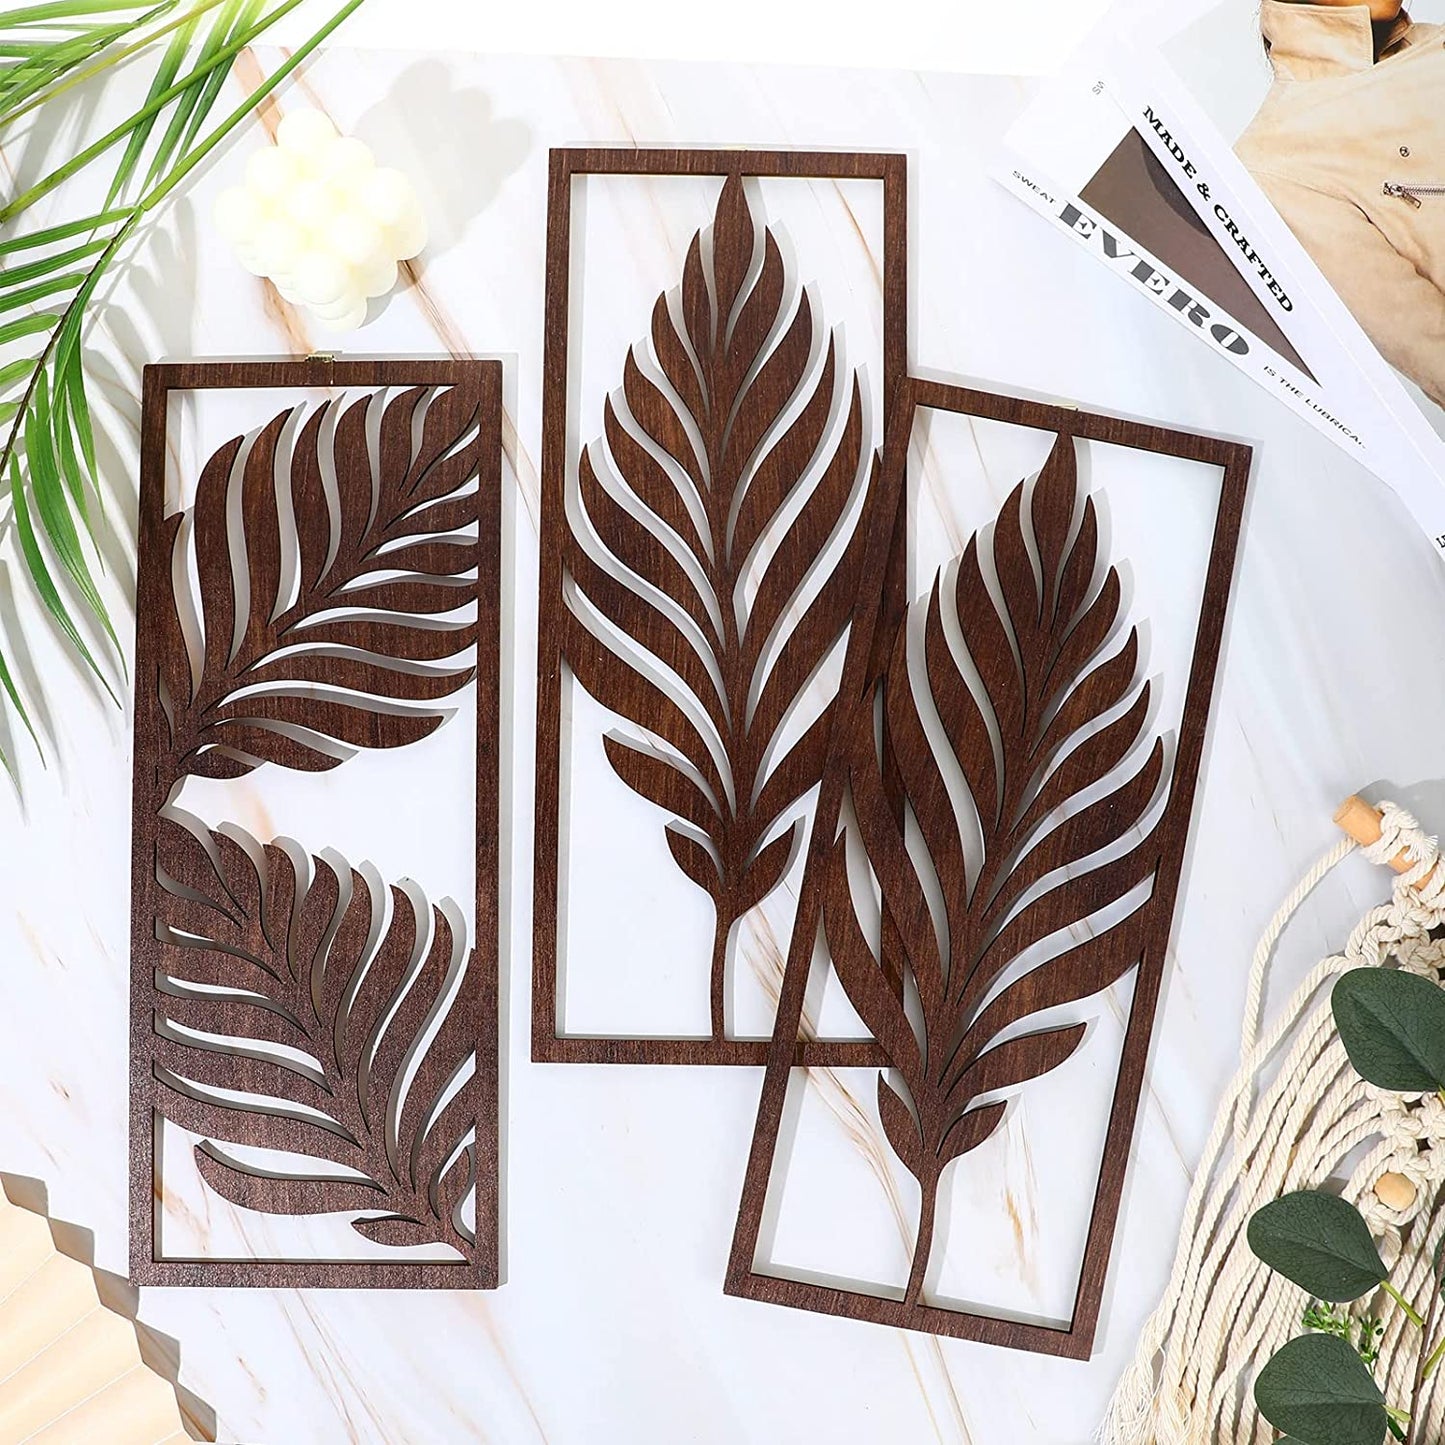 3 Pcs Boho Wooden Art Wall Decor Leaf Sign Wall Accent Rustic Palm Leaf Wood Art Wall Hanging Sculpture Vintage Tropical Plant Wood Wall Plaque for Home Bathroom Living Room Office Decoration (Brown)